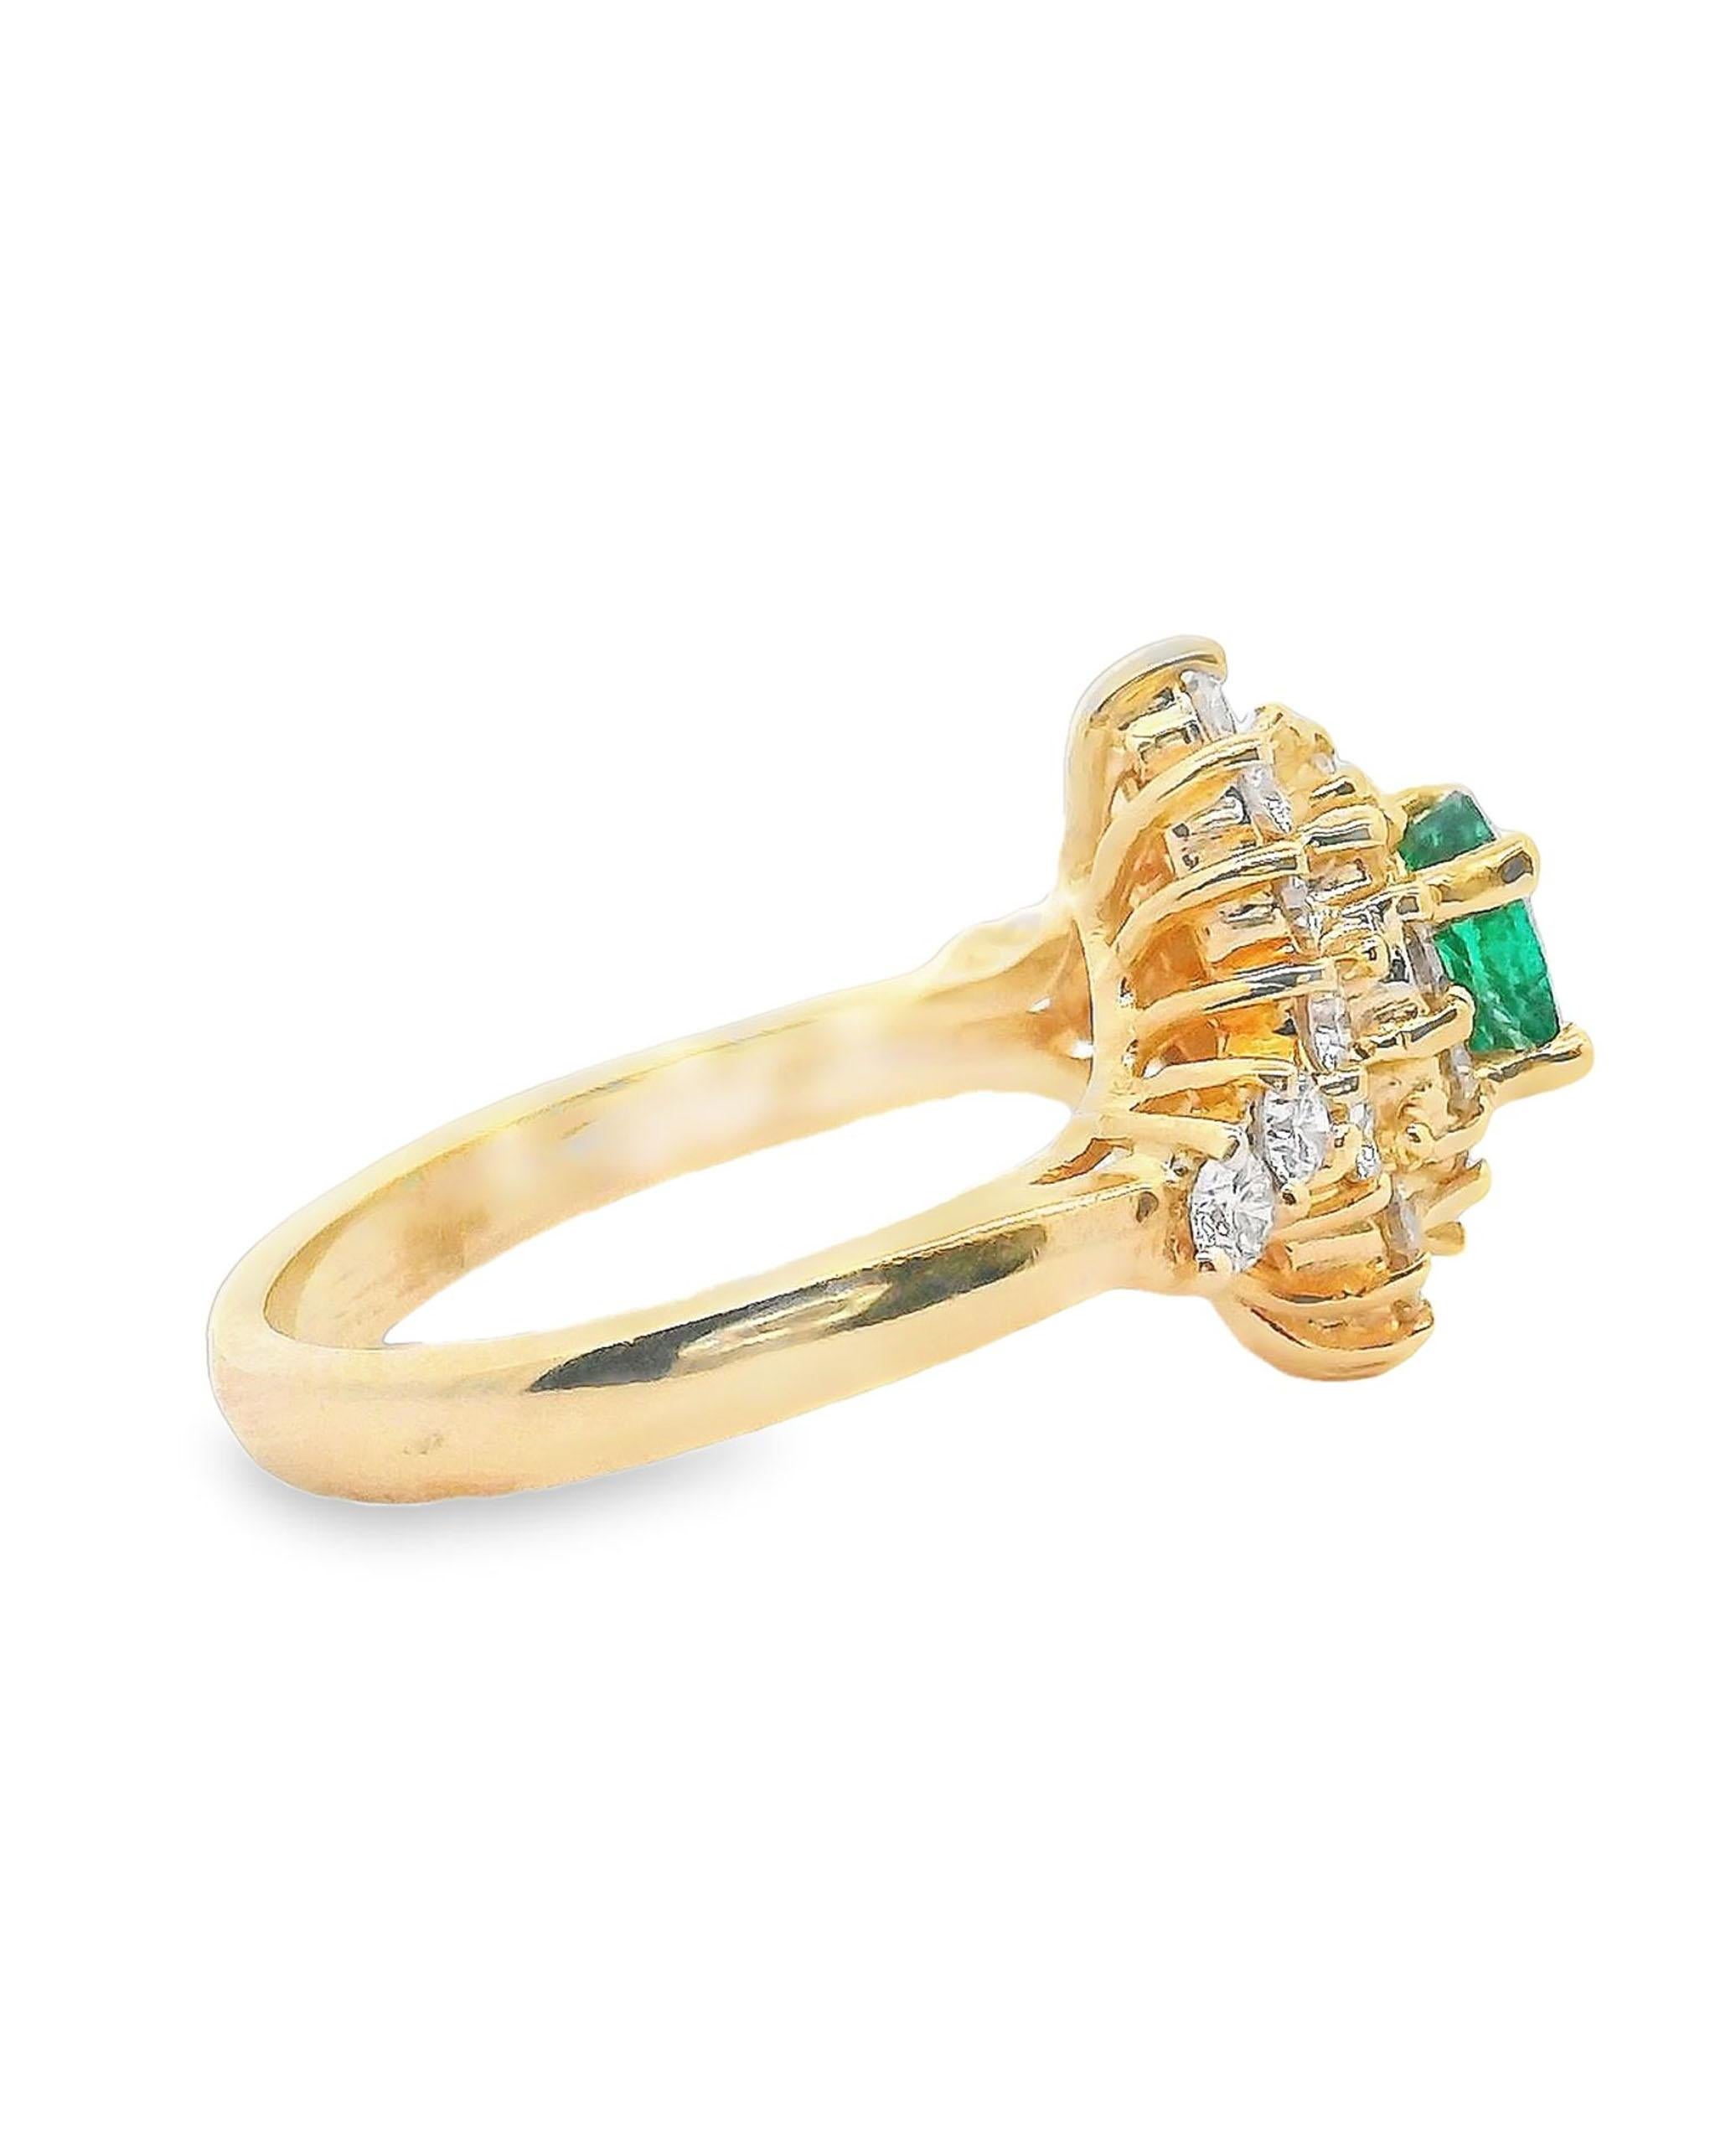 Preowned 14K yellow gold ring with 28 round brilliant-cut diamonds weighing approximately 1.00 carats (H color, VS clarity). In the center, one fine quality oval emerald weighing approximately 0.70 carat.

* Finger size 6.25
